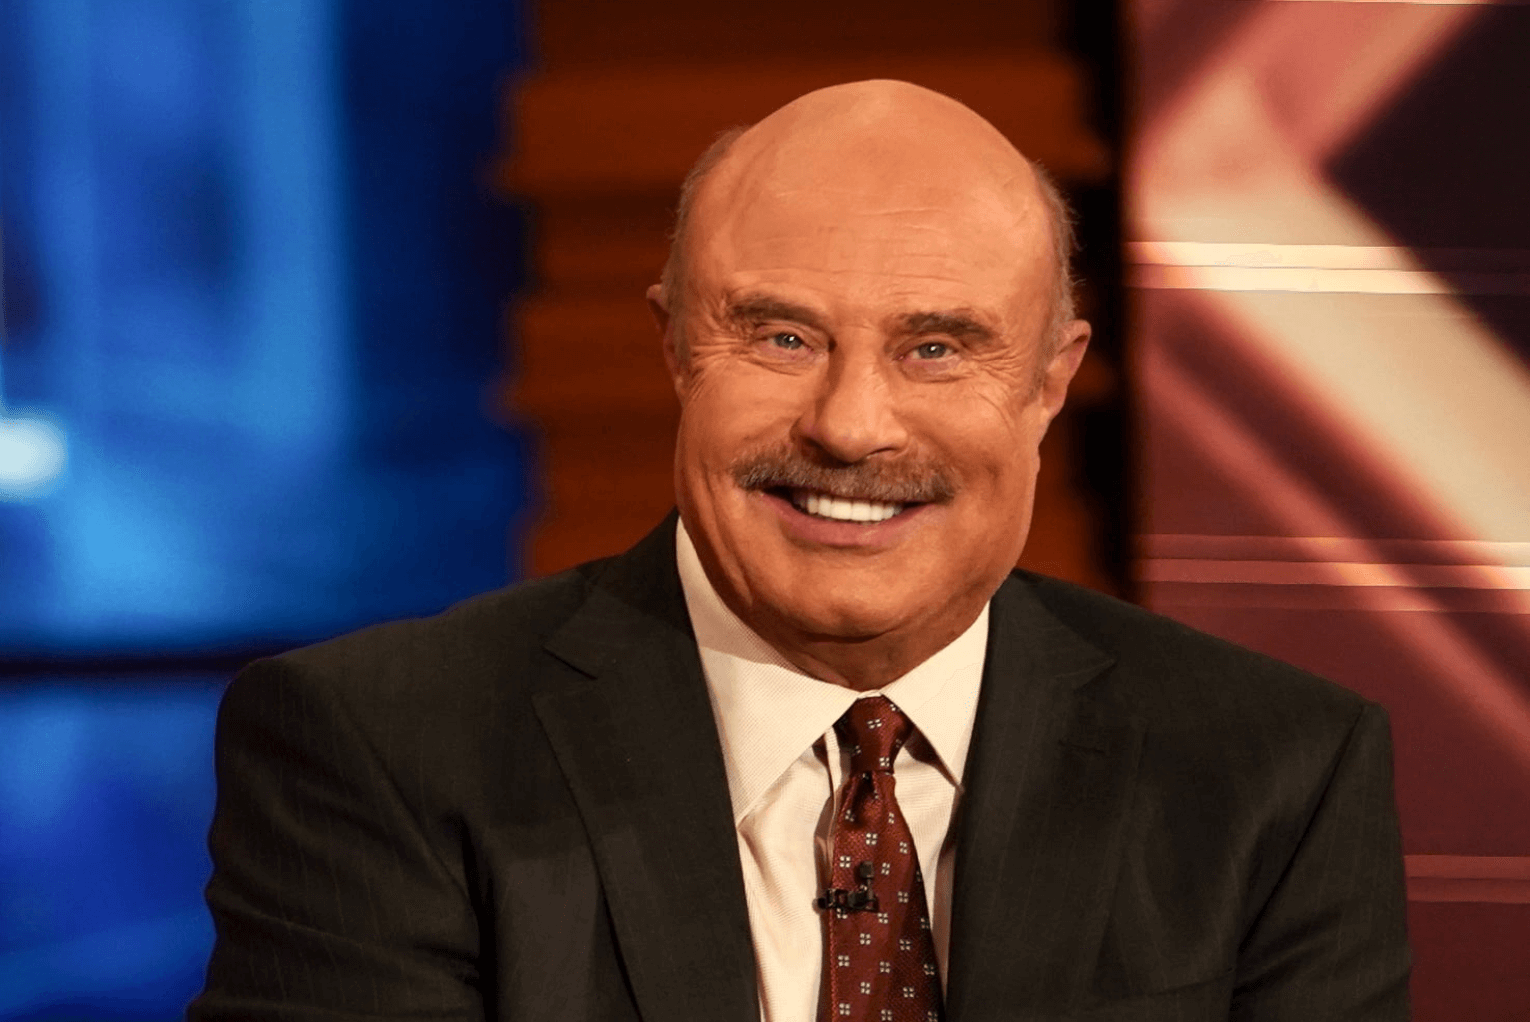 Dr. Phil Talks at Megachurch on the Power of Prayer, Family Unit